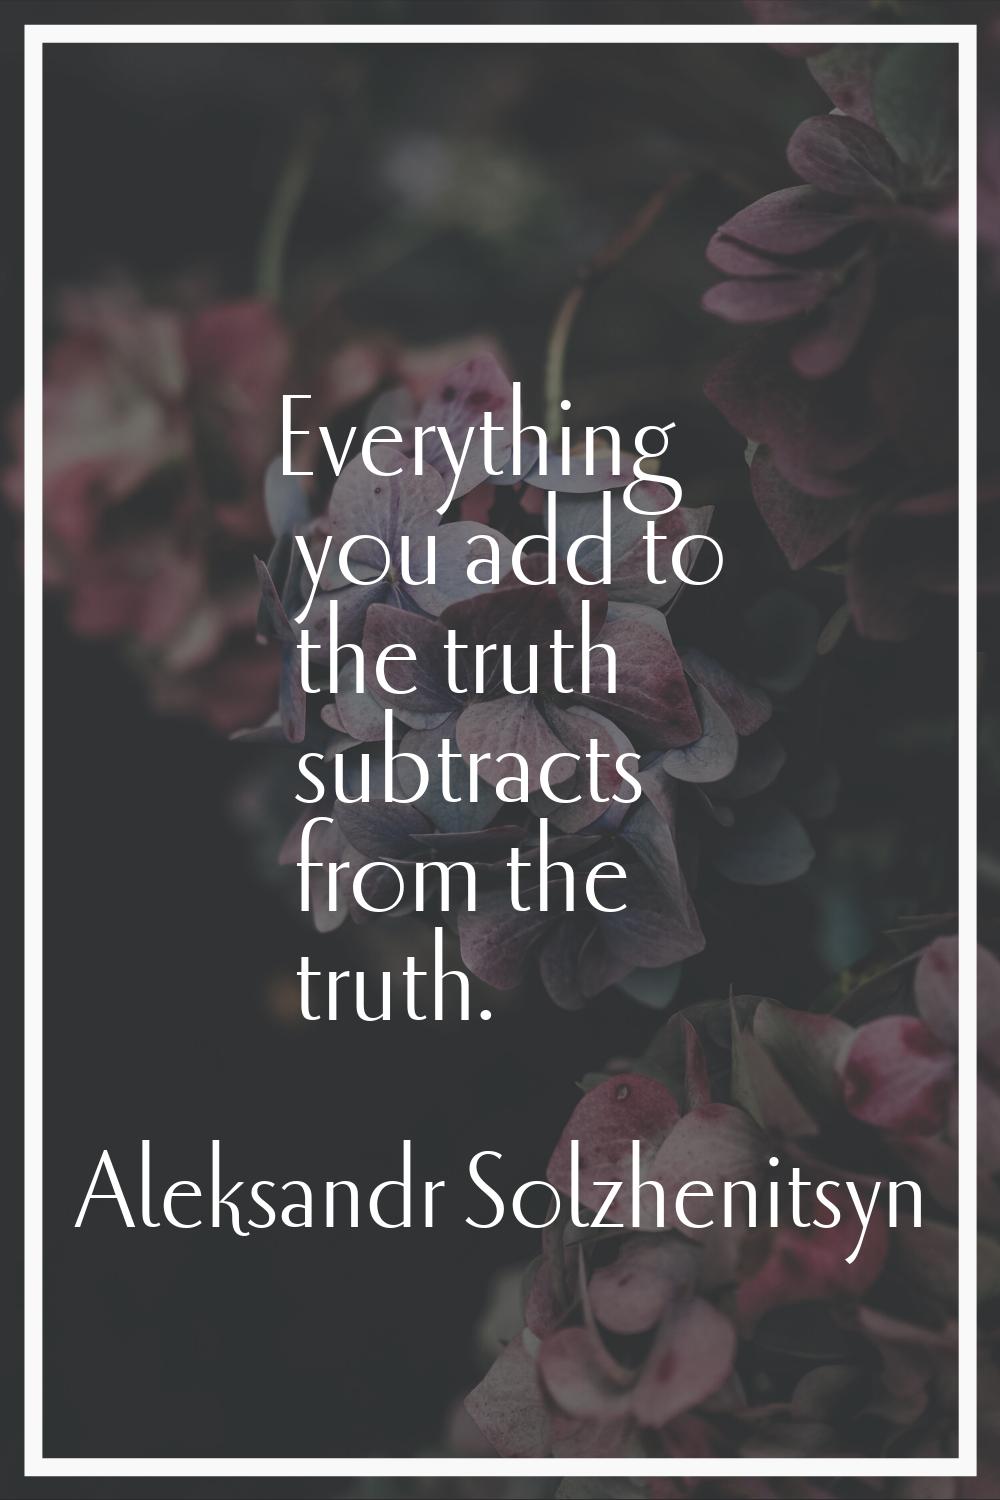 Everything you add to the truth subtracts from the truth.